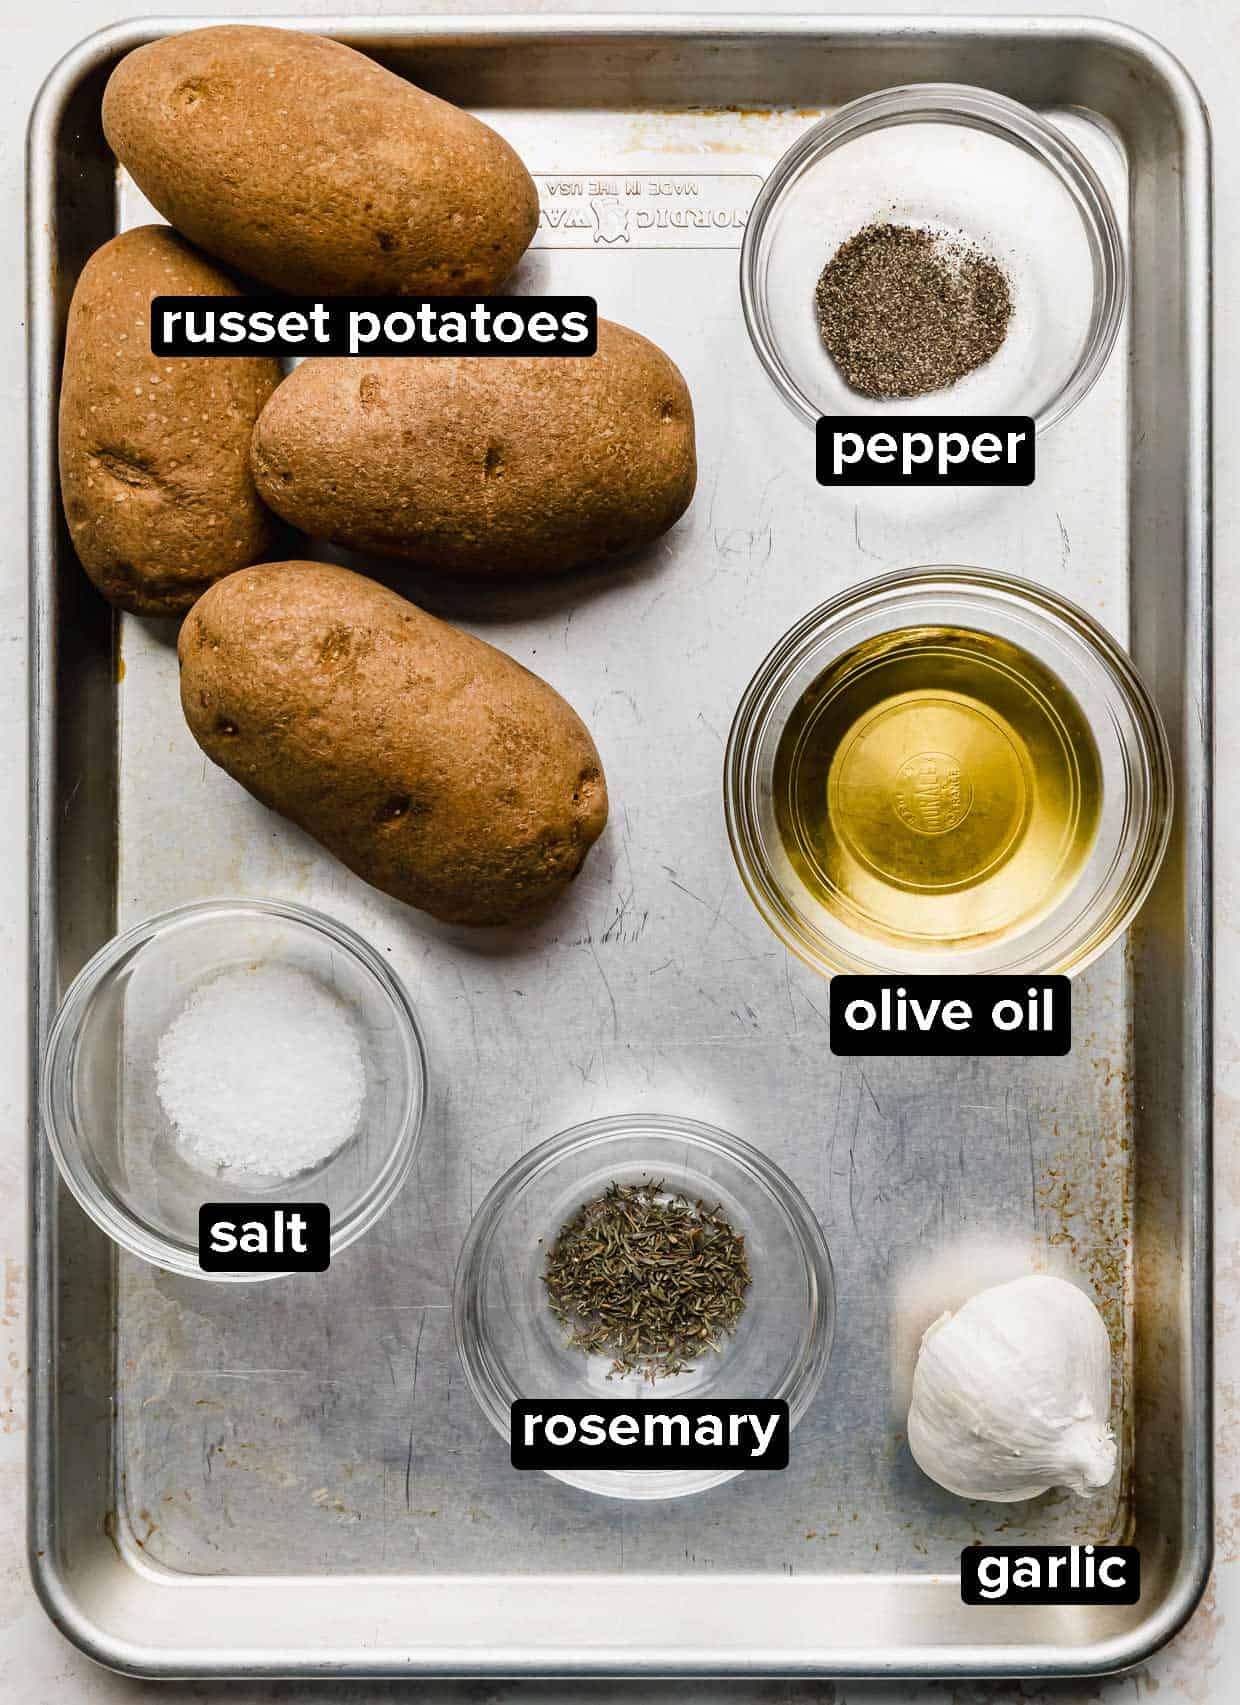 A baking sheet with salt, russet potatoes, garlic, olive oil, garlic, and rosemary on it.